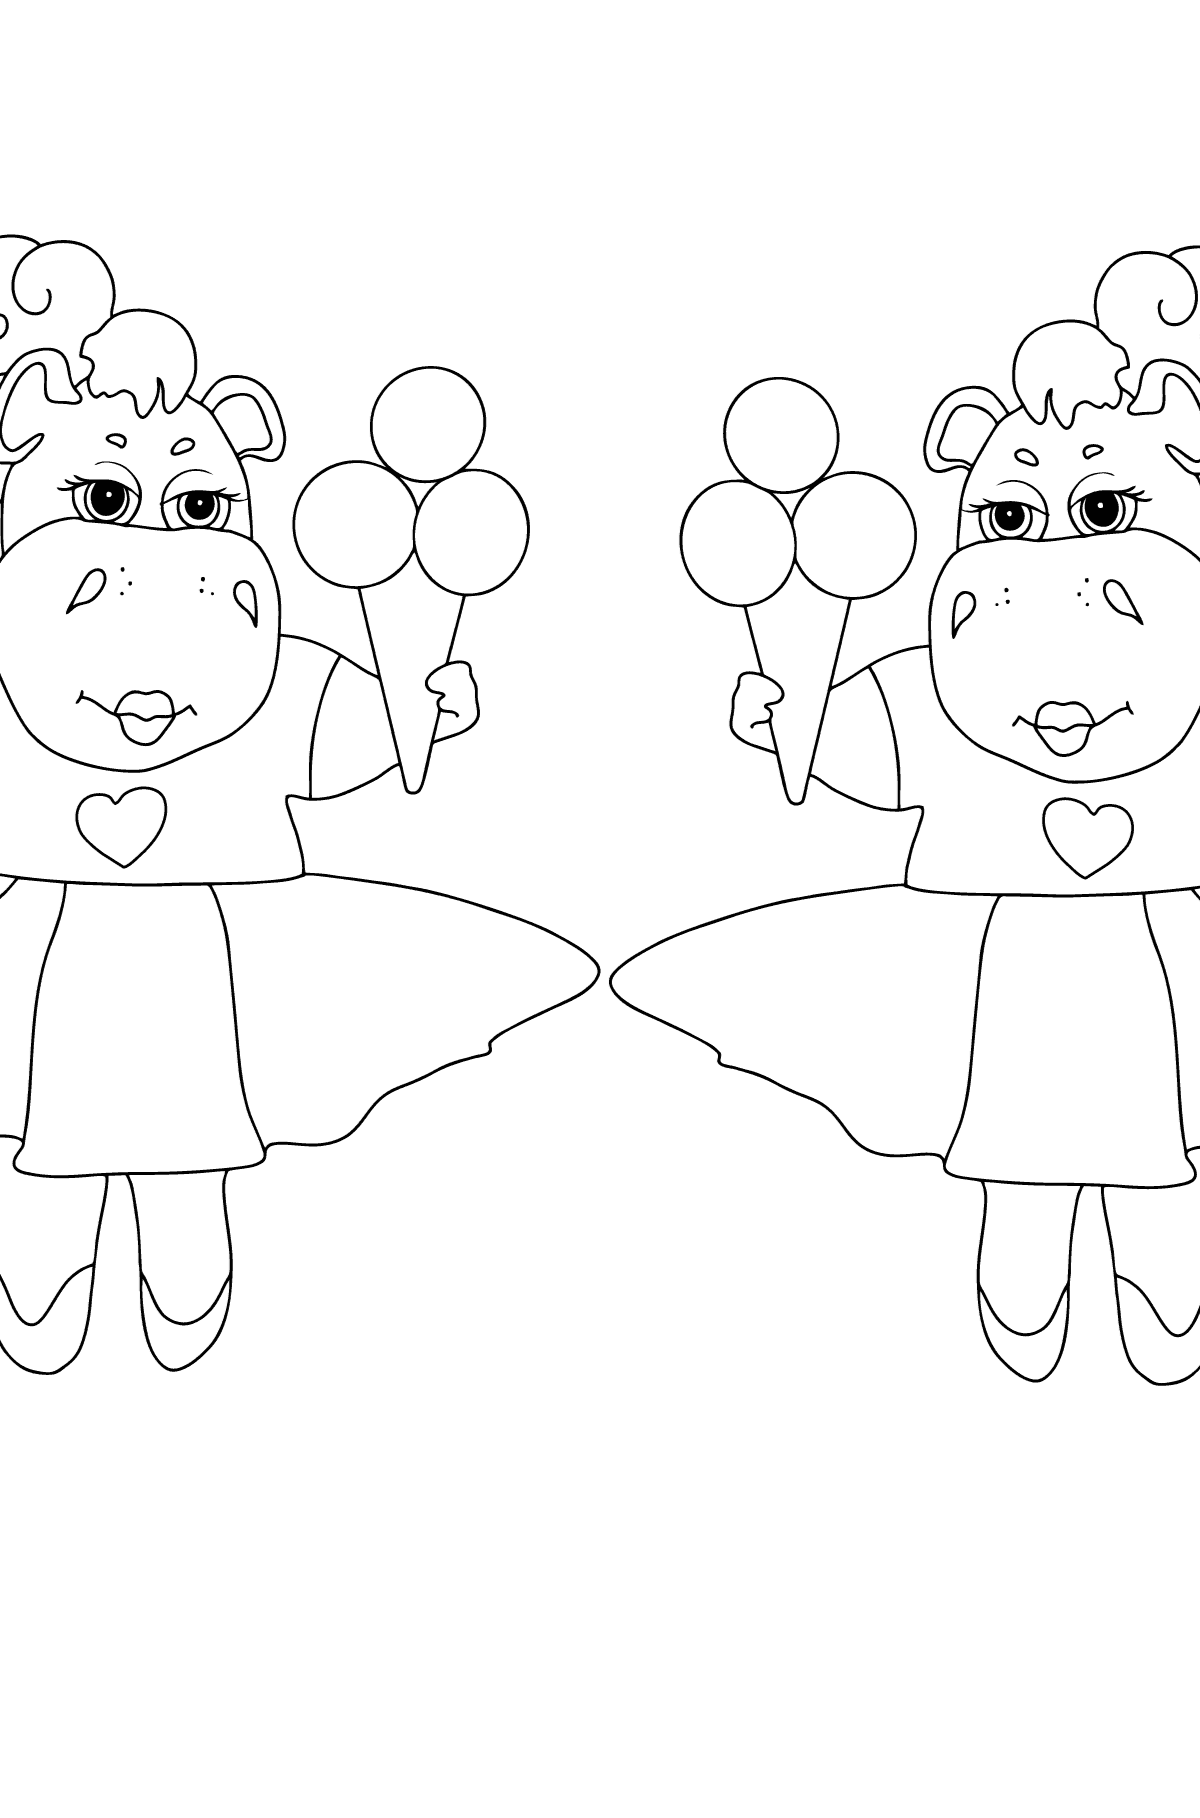 Adorable Hippos (hard) coloring page - Coloring Pages for Kids